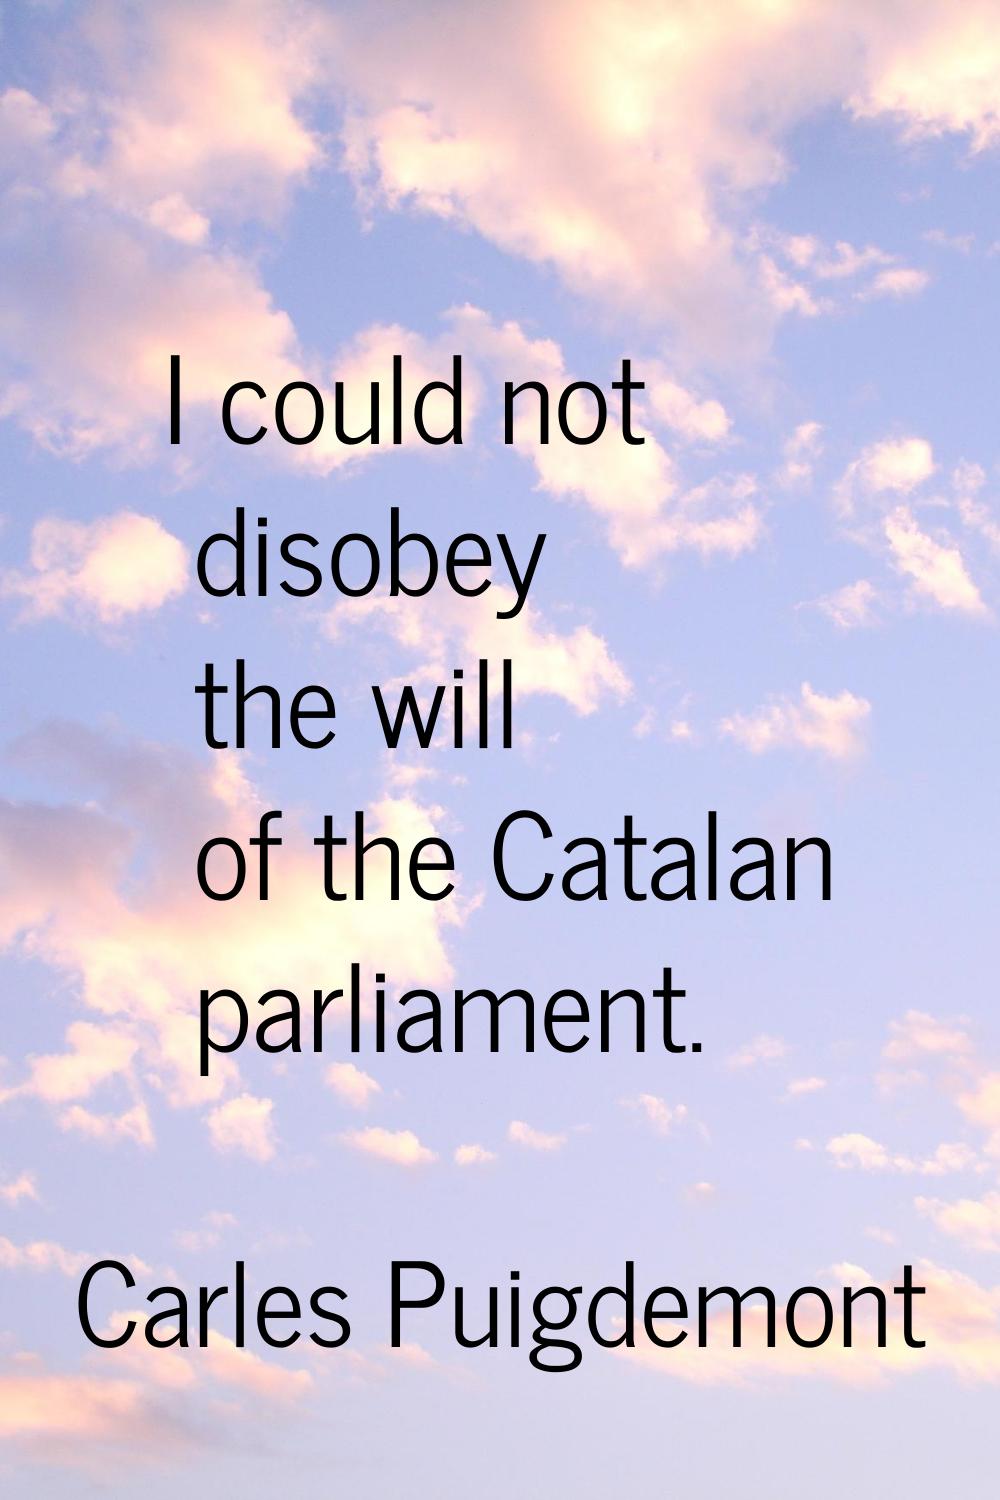 I could not disobey the will of the Catalan parliament.